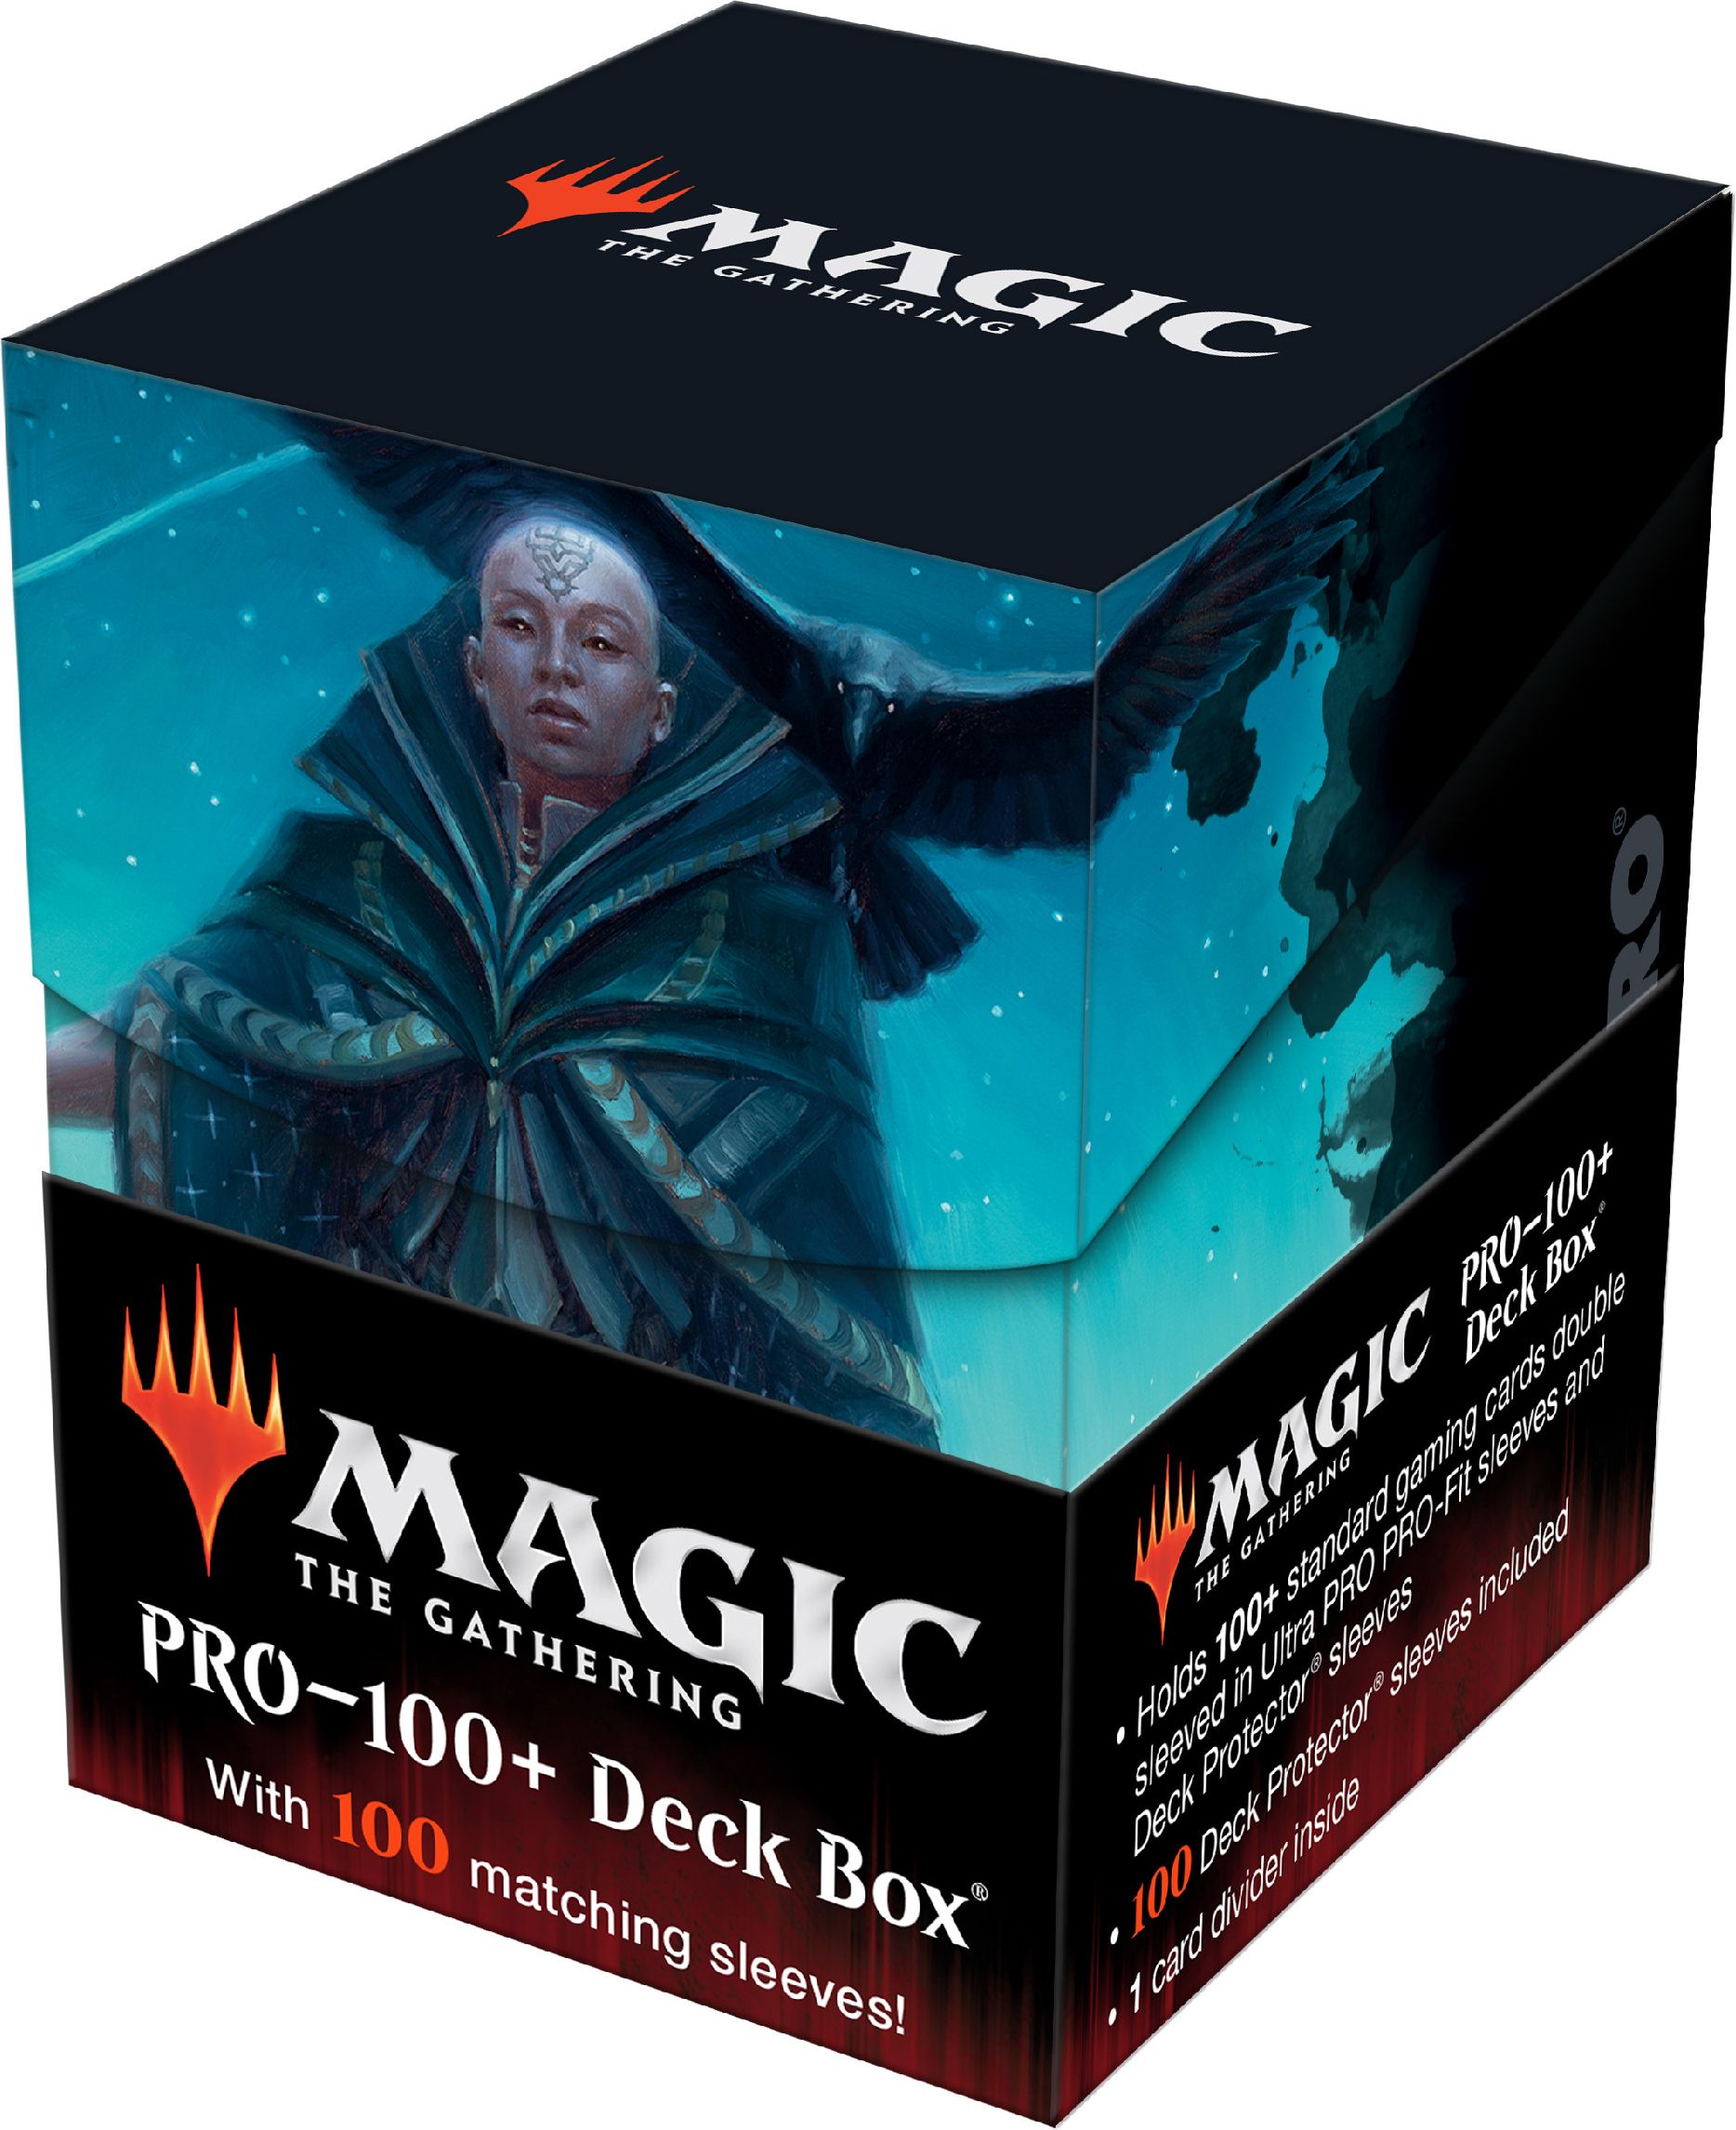 Ultra Pro UltraPro Deck Box 100+ Commander Adventures in the Forgotten Realms + 100ct sleeves V2 for Magic: The Gathering - obrázek 1